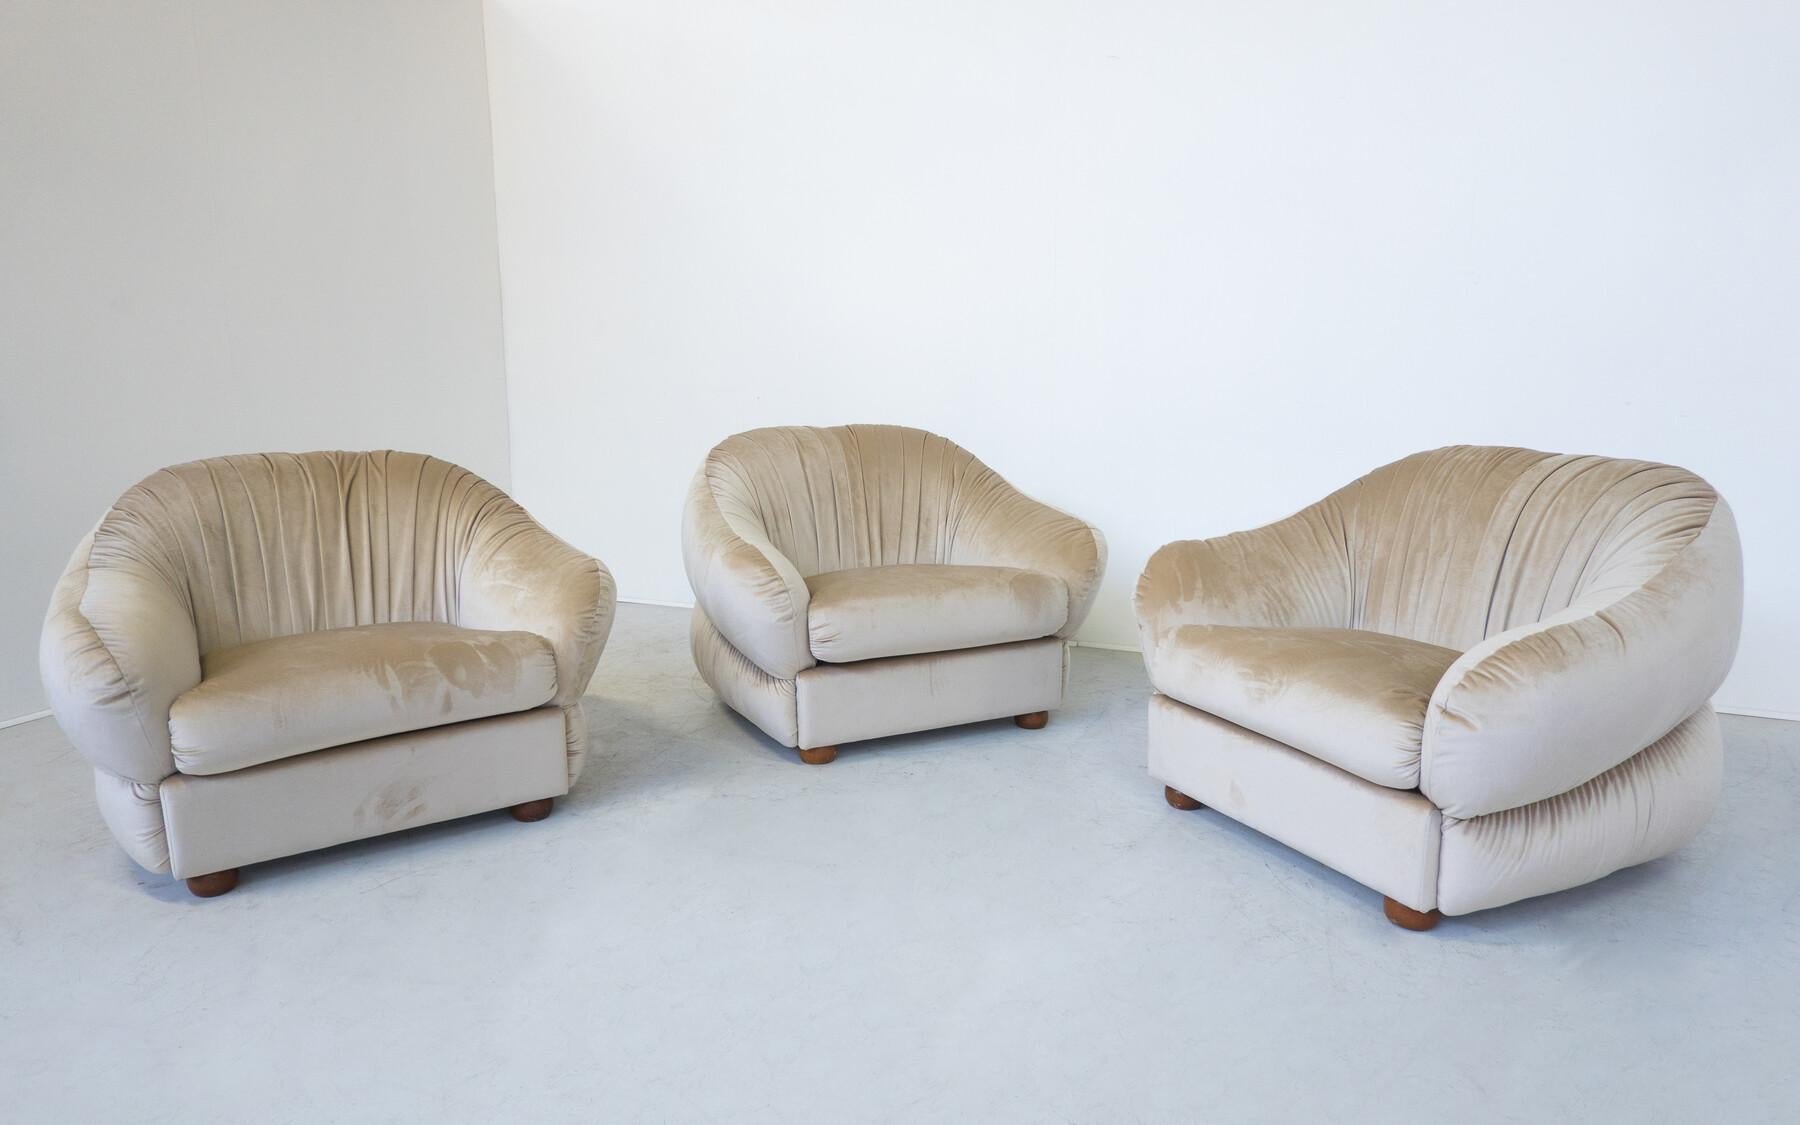 Italian Mid-Century Modern 3 Armchairs, Italy, 1960s, - New Upholstery For Sale